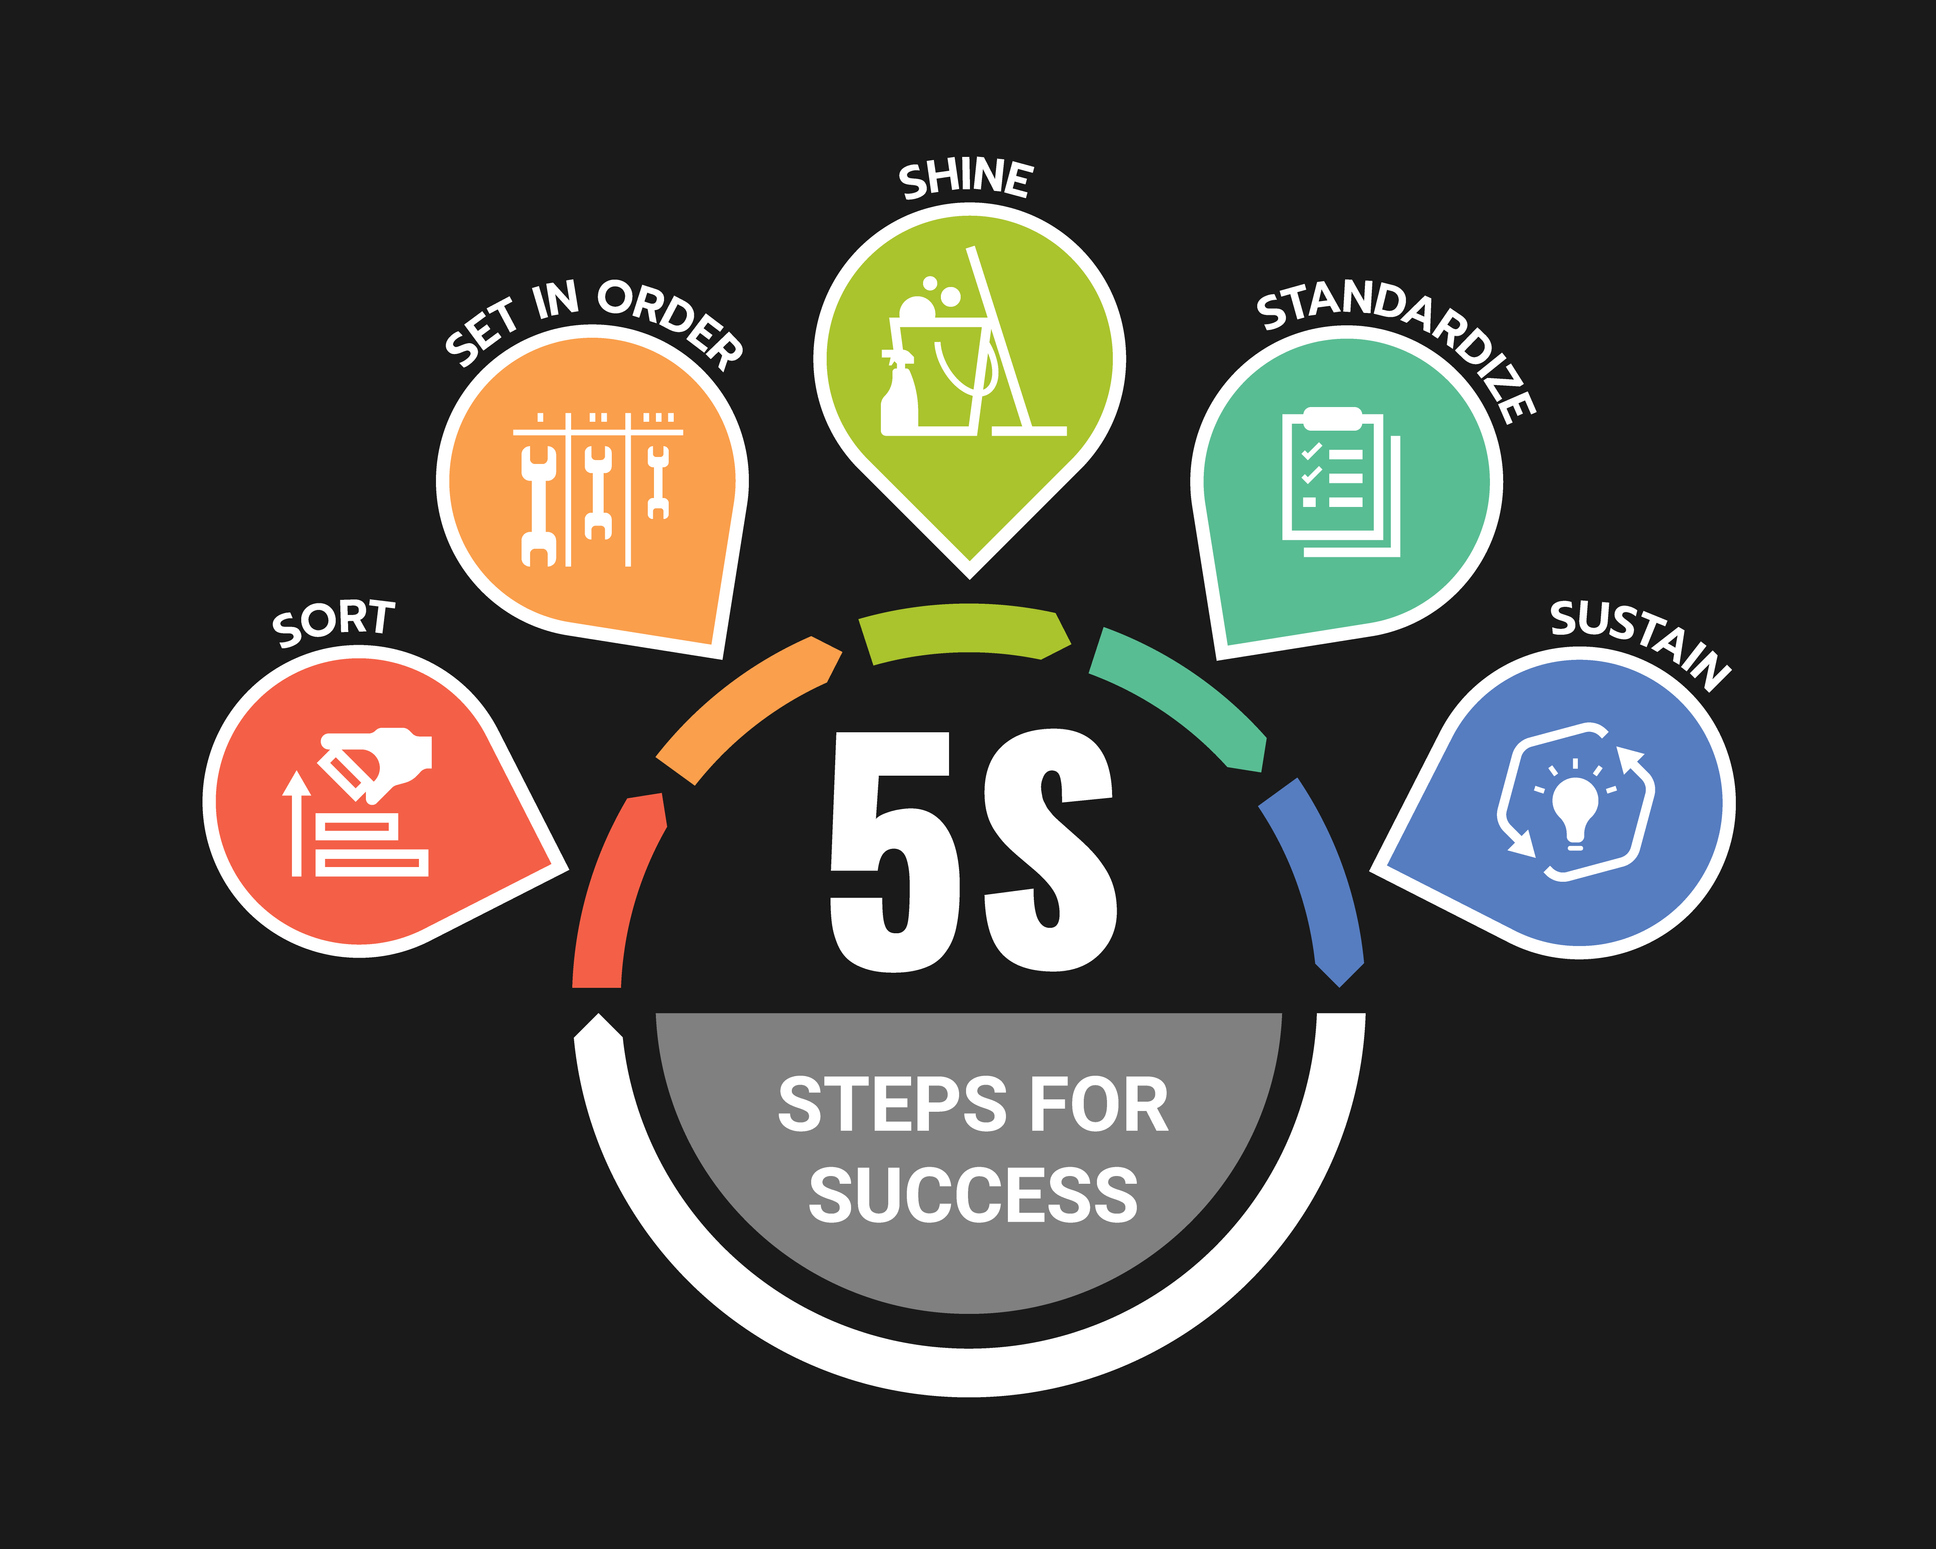 A graphic showing the 5 steps of 5S for successful Kaizen events.